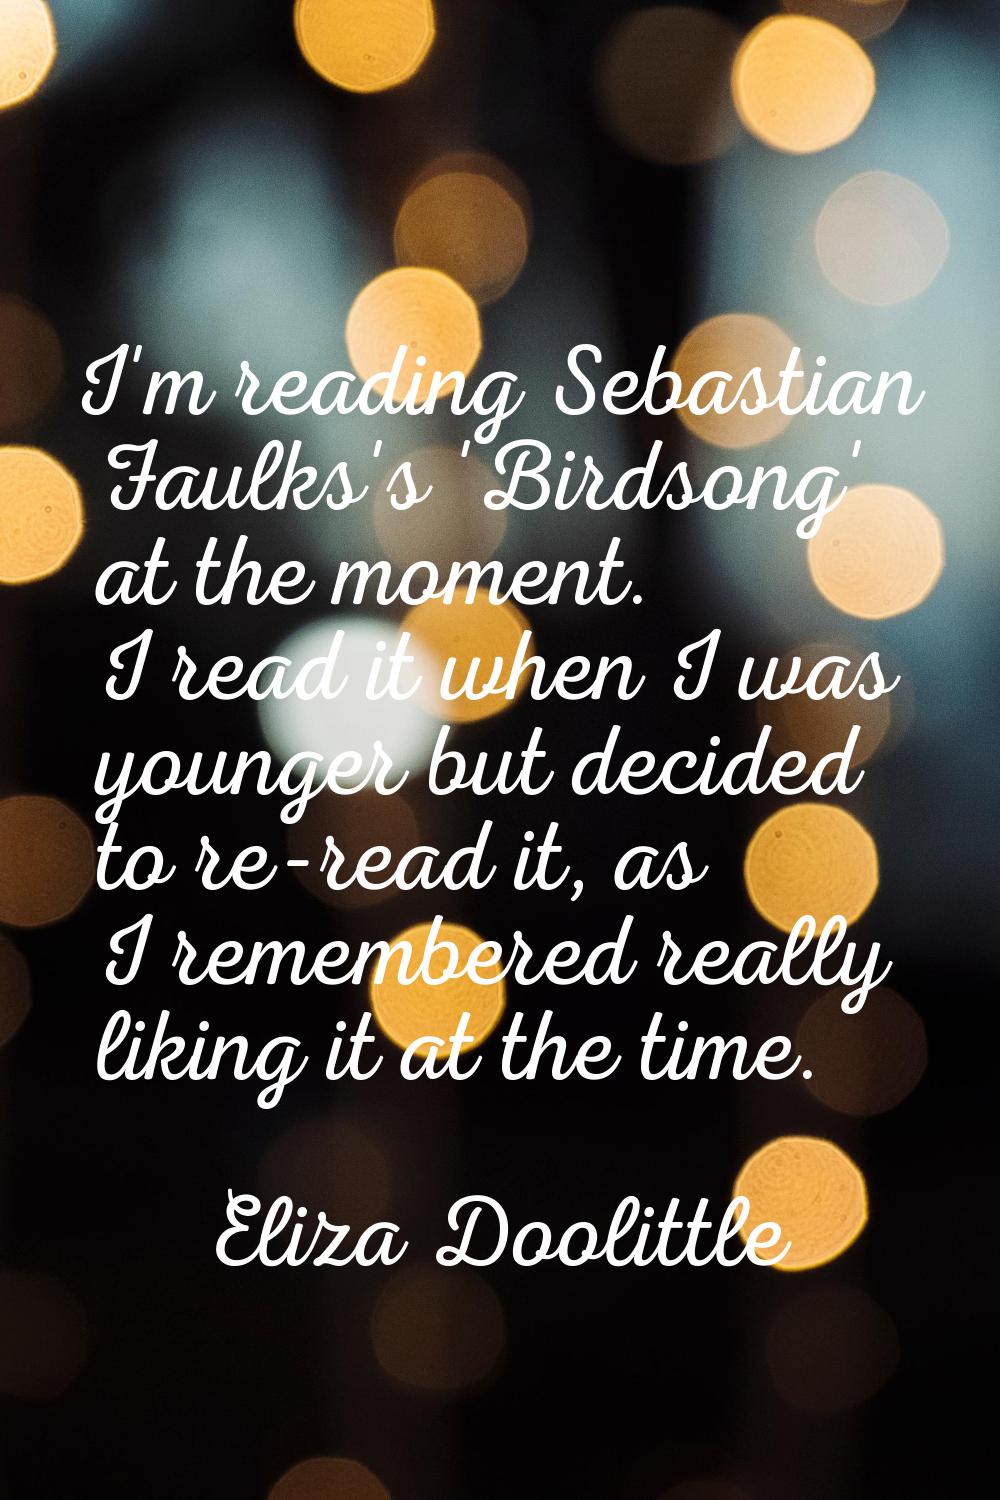 I'm reading Sebastian Faulks's 'Birdsong' at the moment. I read it when I was younger but decided t